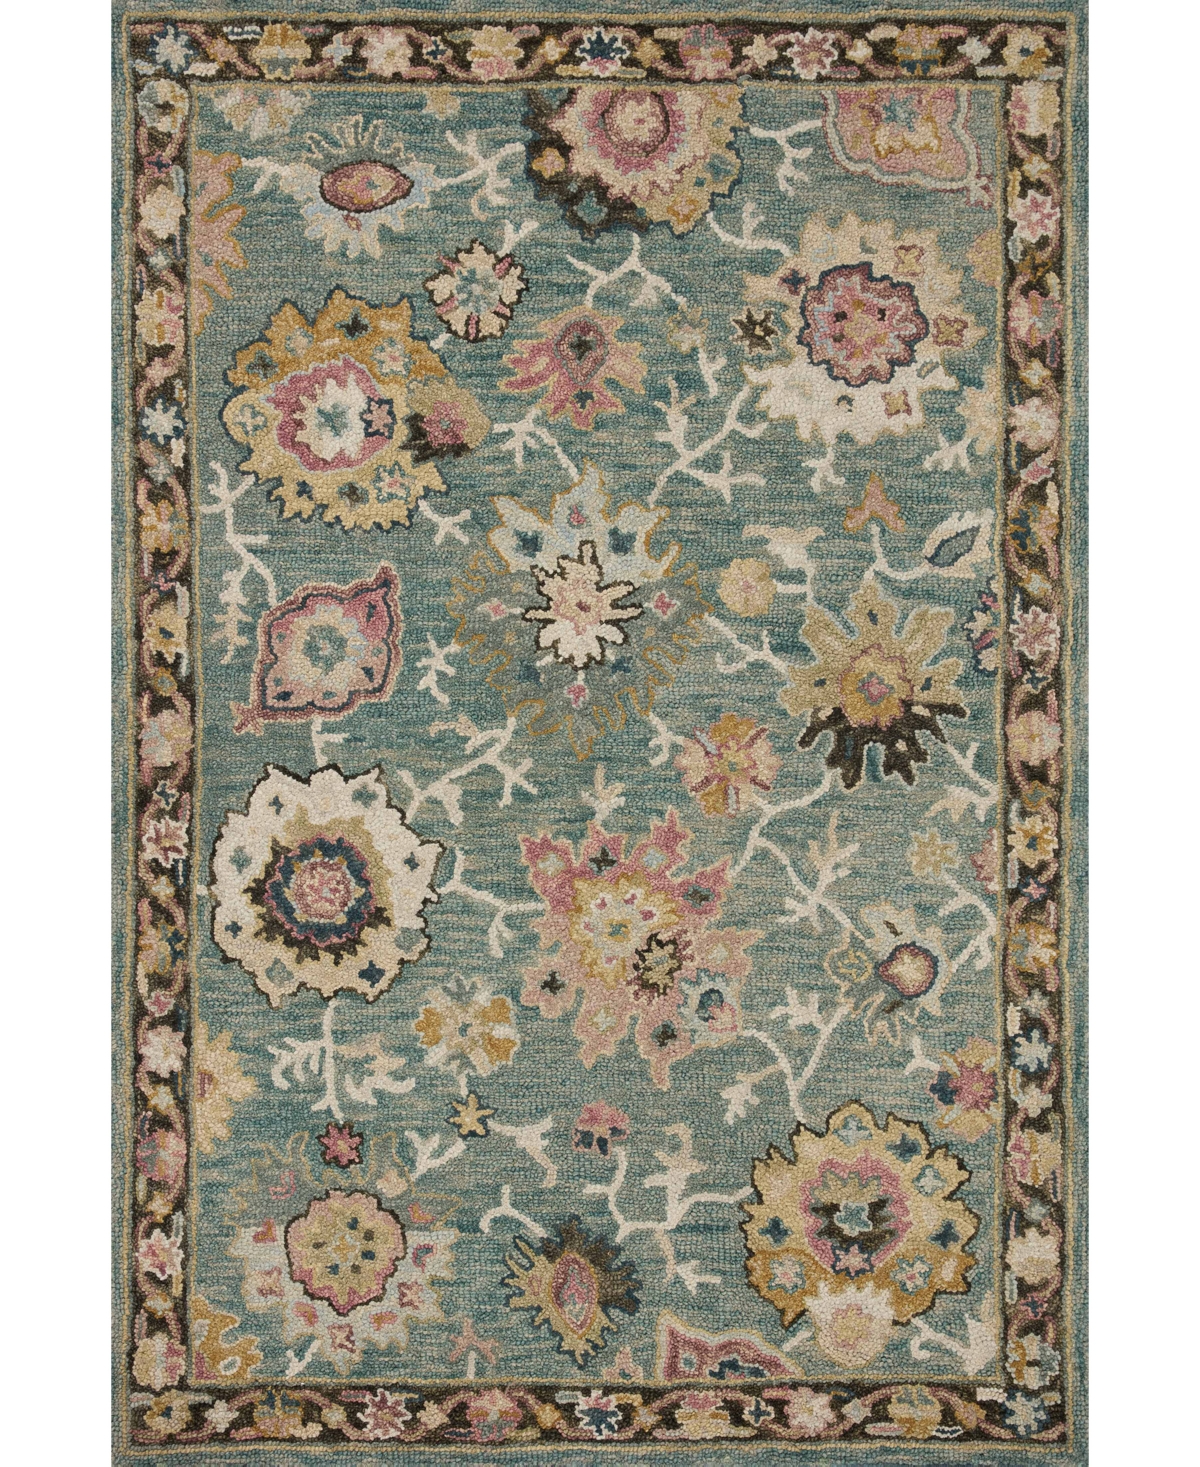 Spring Valley Home Padma Pma-04 3'6" X 5'6" Area Rug In Teal/multi